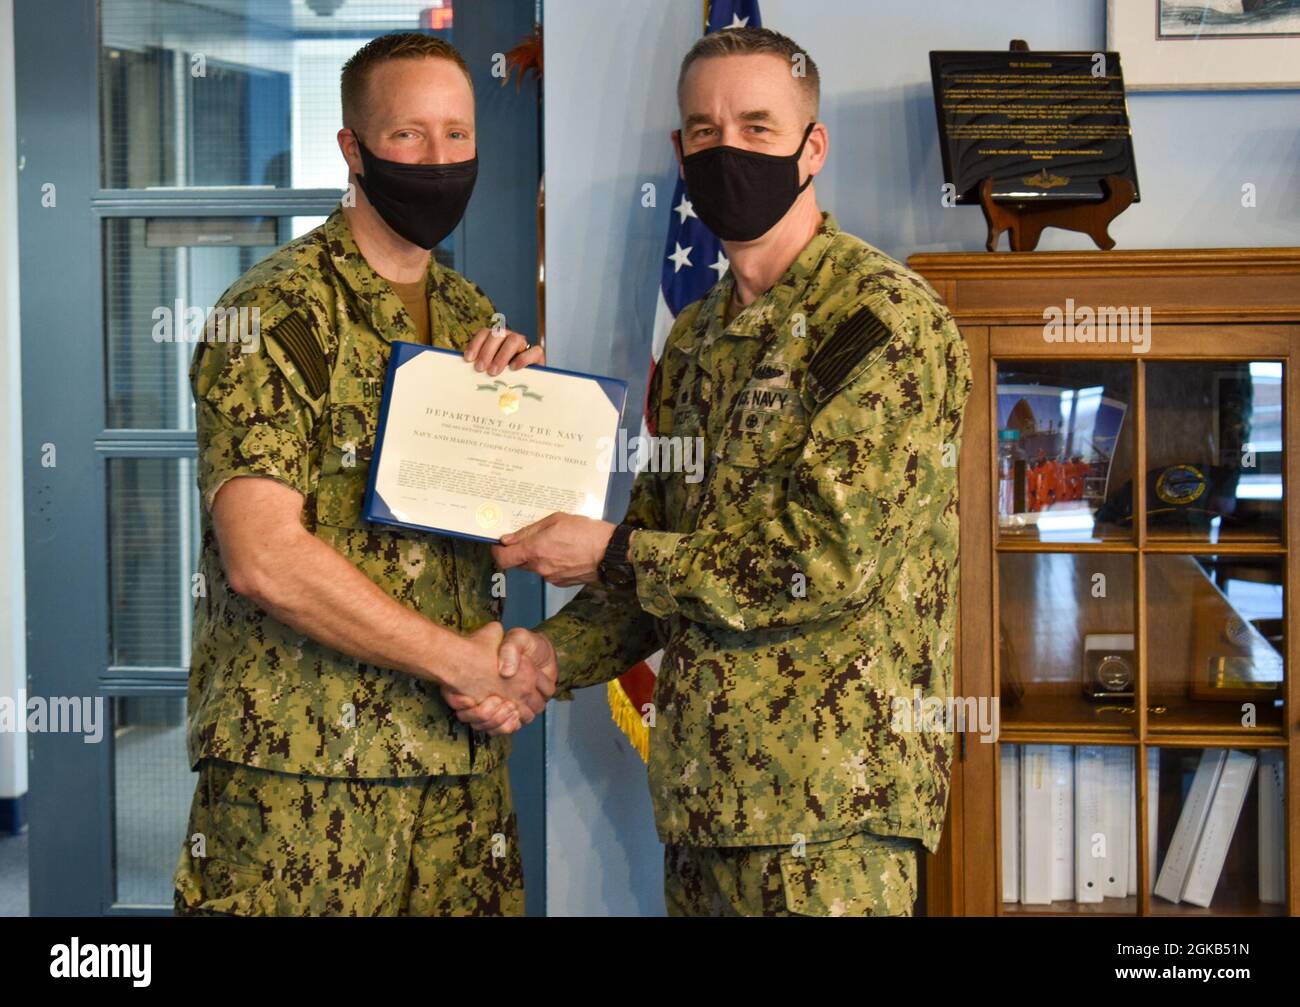 Capt. Steven W. Antcliff, Commanding Officer of the Naval Submarine School, awards Lt. Nicholas H. Biela with the Navy and Marine Corps Commendation Medal at Naval Submarine Base New London, Groton CT, on March 1, 2021 upon successful completion of his tour as an instructor at the Submarine Officer Basic Course. He was responsible for training and preparing junior officers for operational submarine service. Stock Photo